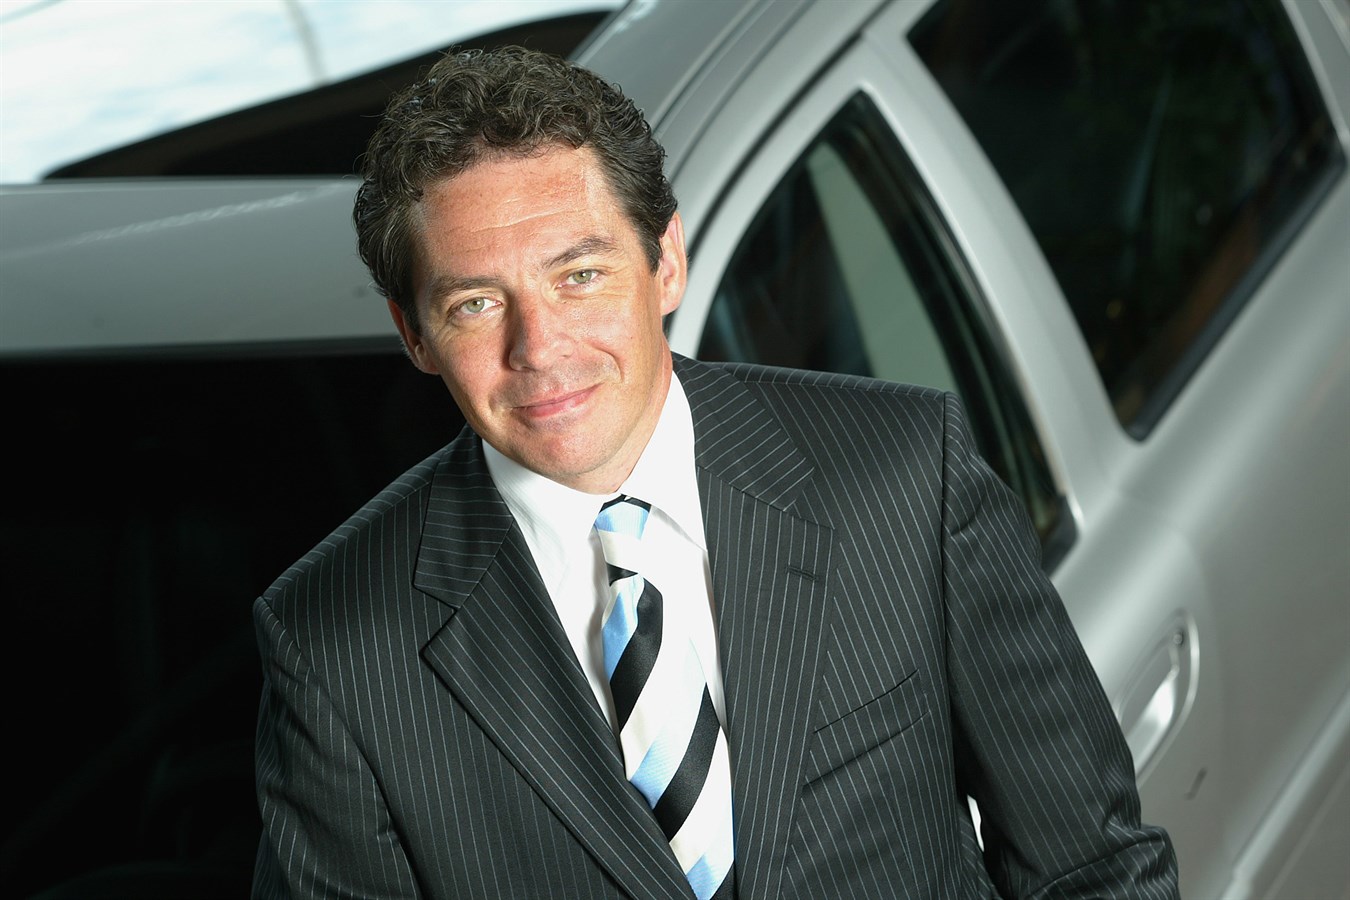 Effective as of March 1 2006, Steven Armstrong,  Senior Vice President for Purchasing, was appointed the new Chief Operating Officer at Volvo Car Corporation.